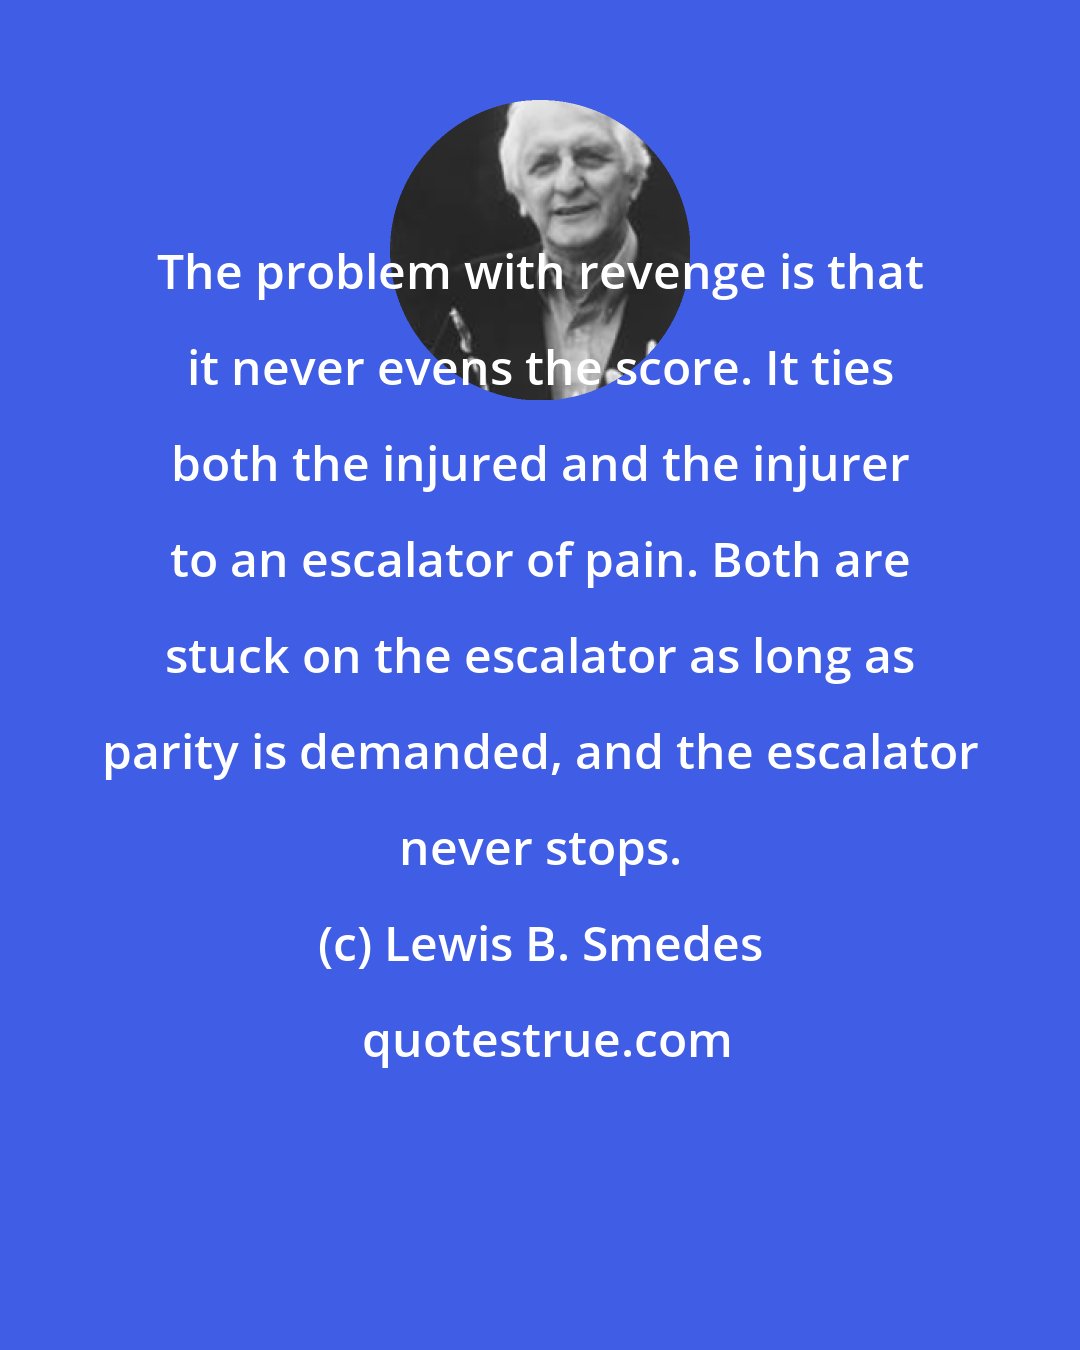 Lewis B. Smedes: The problem with revenge is that it never evens the score. It ties both the injured and the injurer to an escalator of pain. Both are stuck on the escalator as long as parity is demanded, and the escalator never stops.